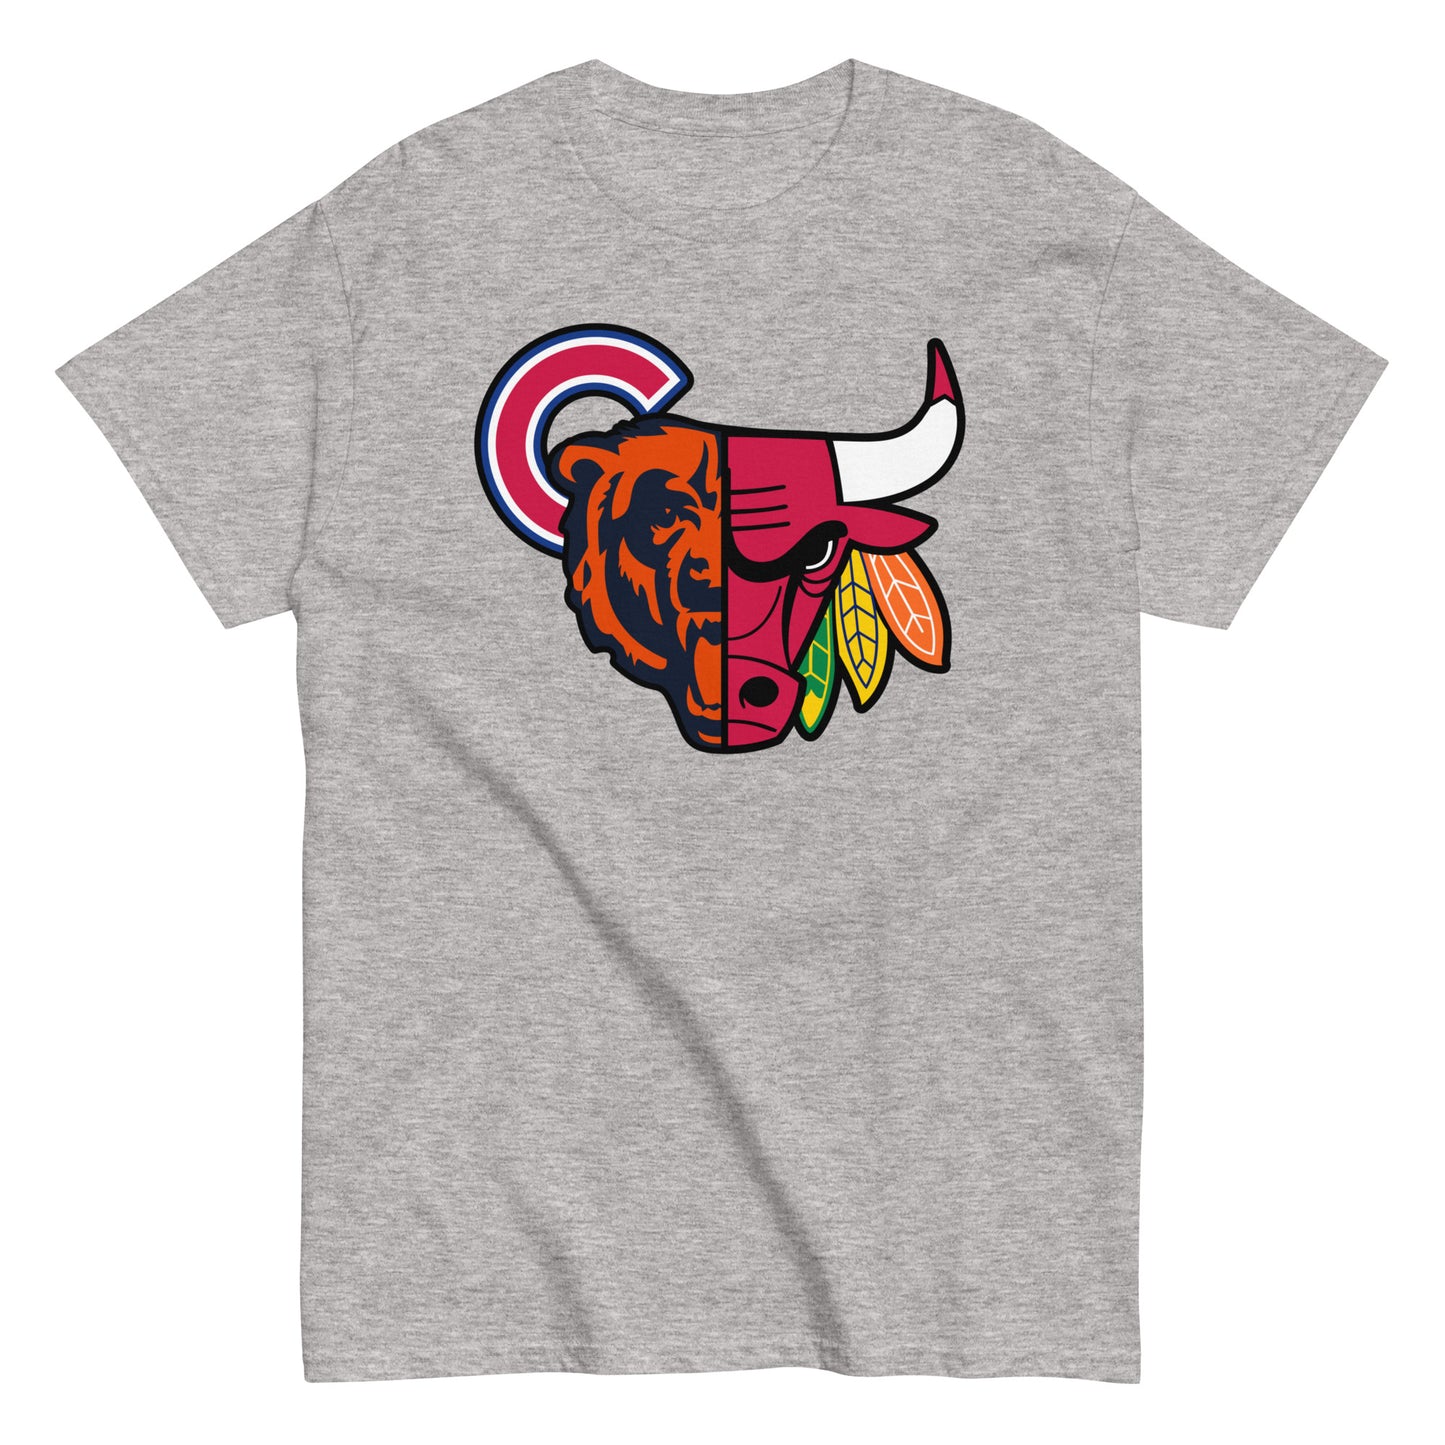 CHI (Cubs) Tee - Full Color